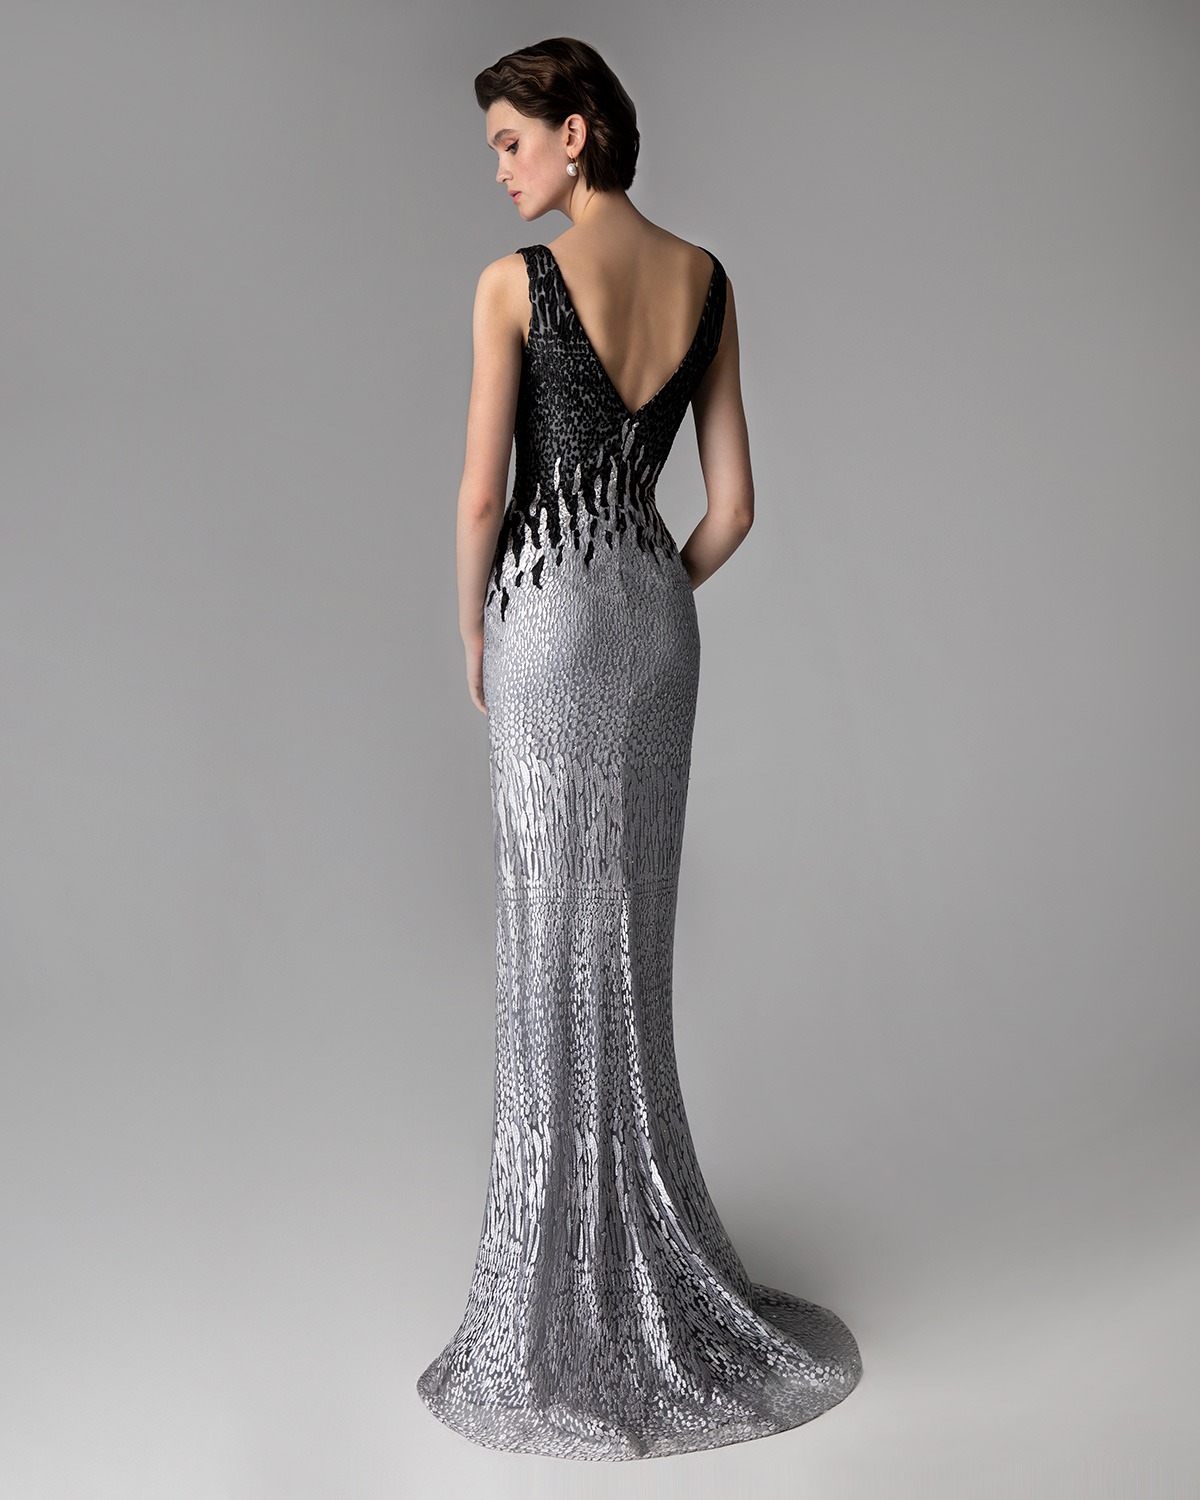 Classic Dresses / Long evening dress with lace and beading